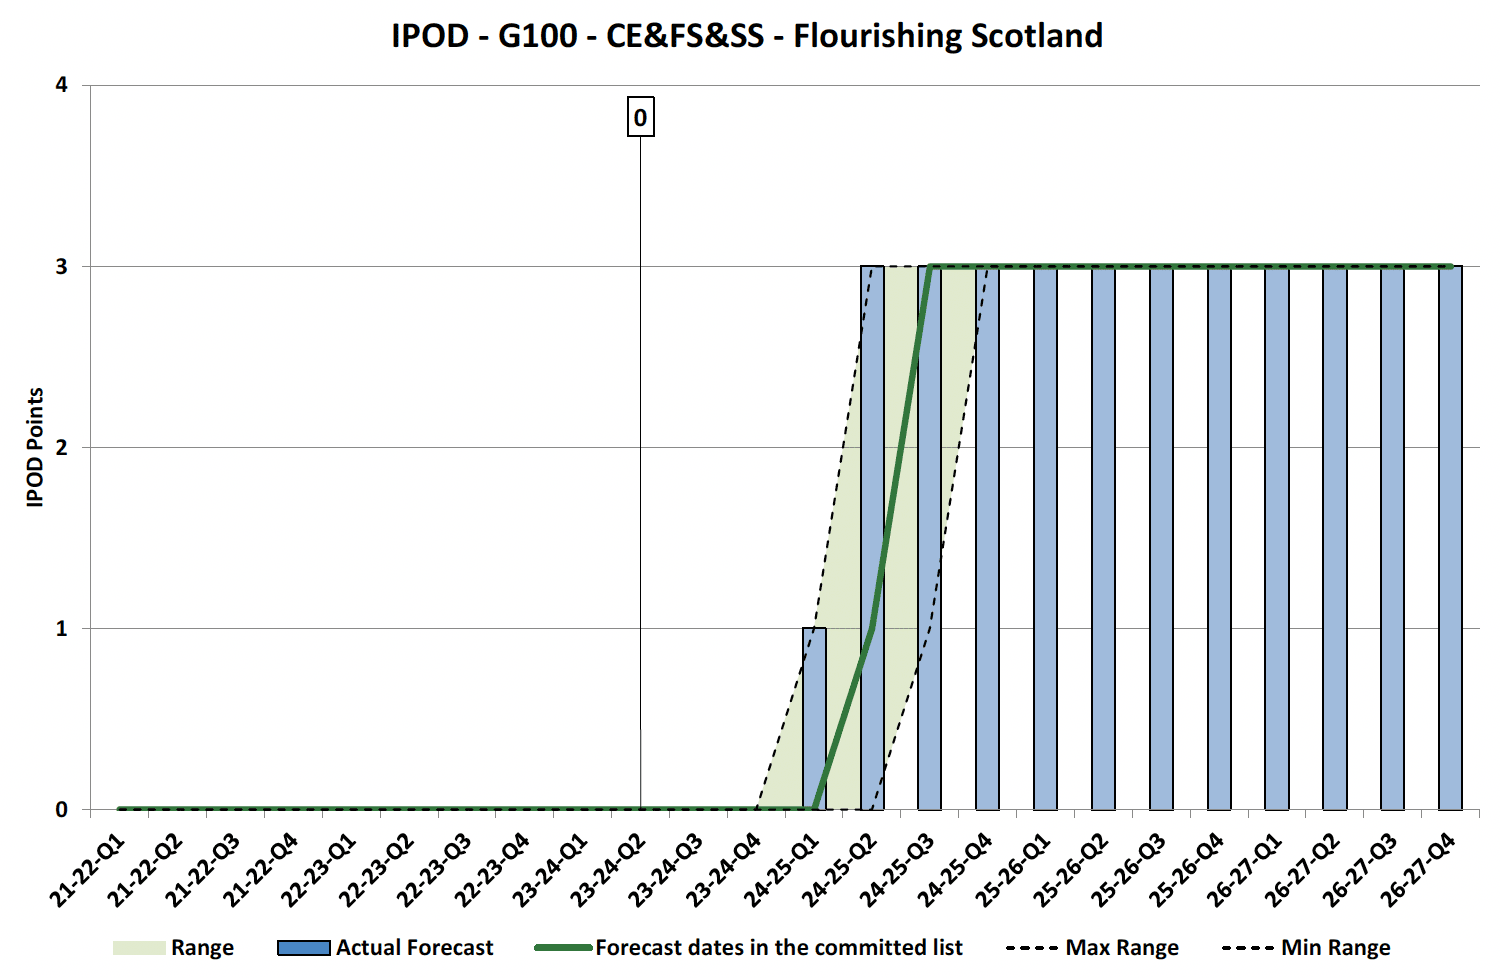 Chart showing IPOD points achieved or forecast for Project Acceptance milestone against target range for Flourishing Scotland Projects in CE&FS&SS Portfolio